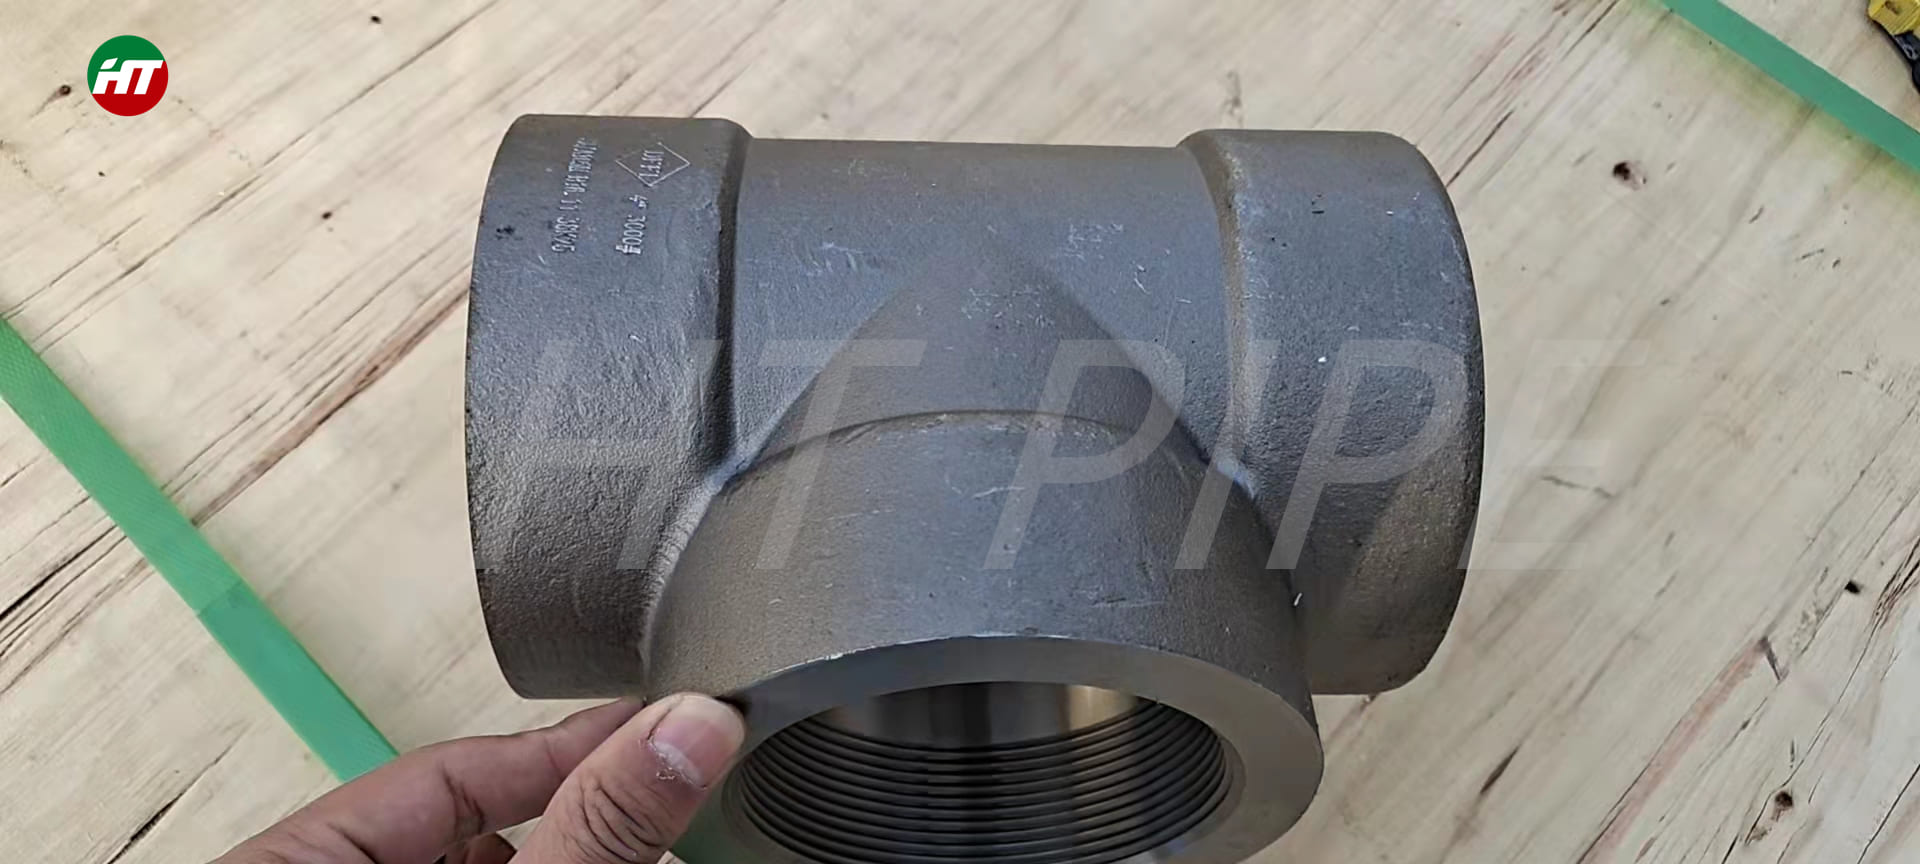 Carbon Steel A105 Forged Fittings Global Supplier of Carbon Steel A105N Socket weld Fittings